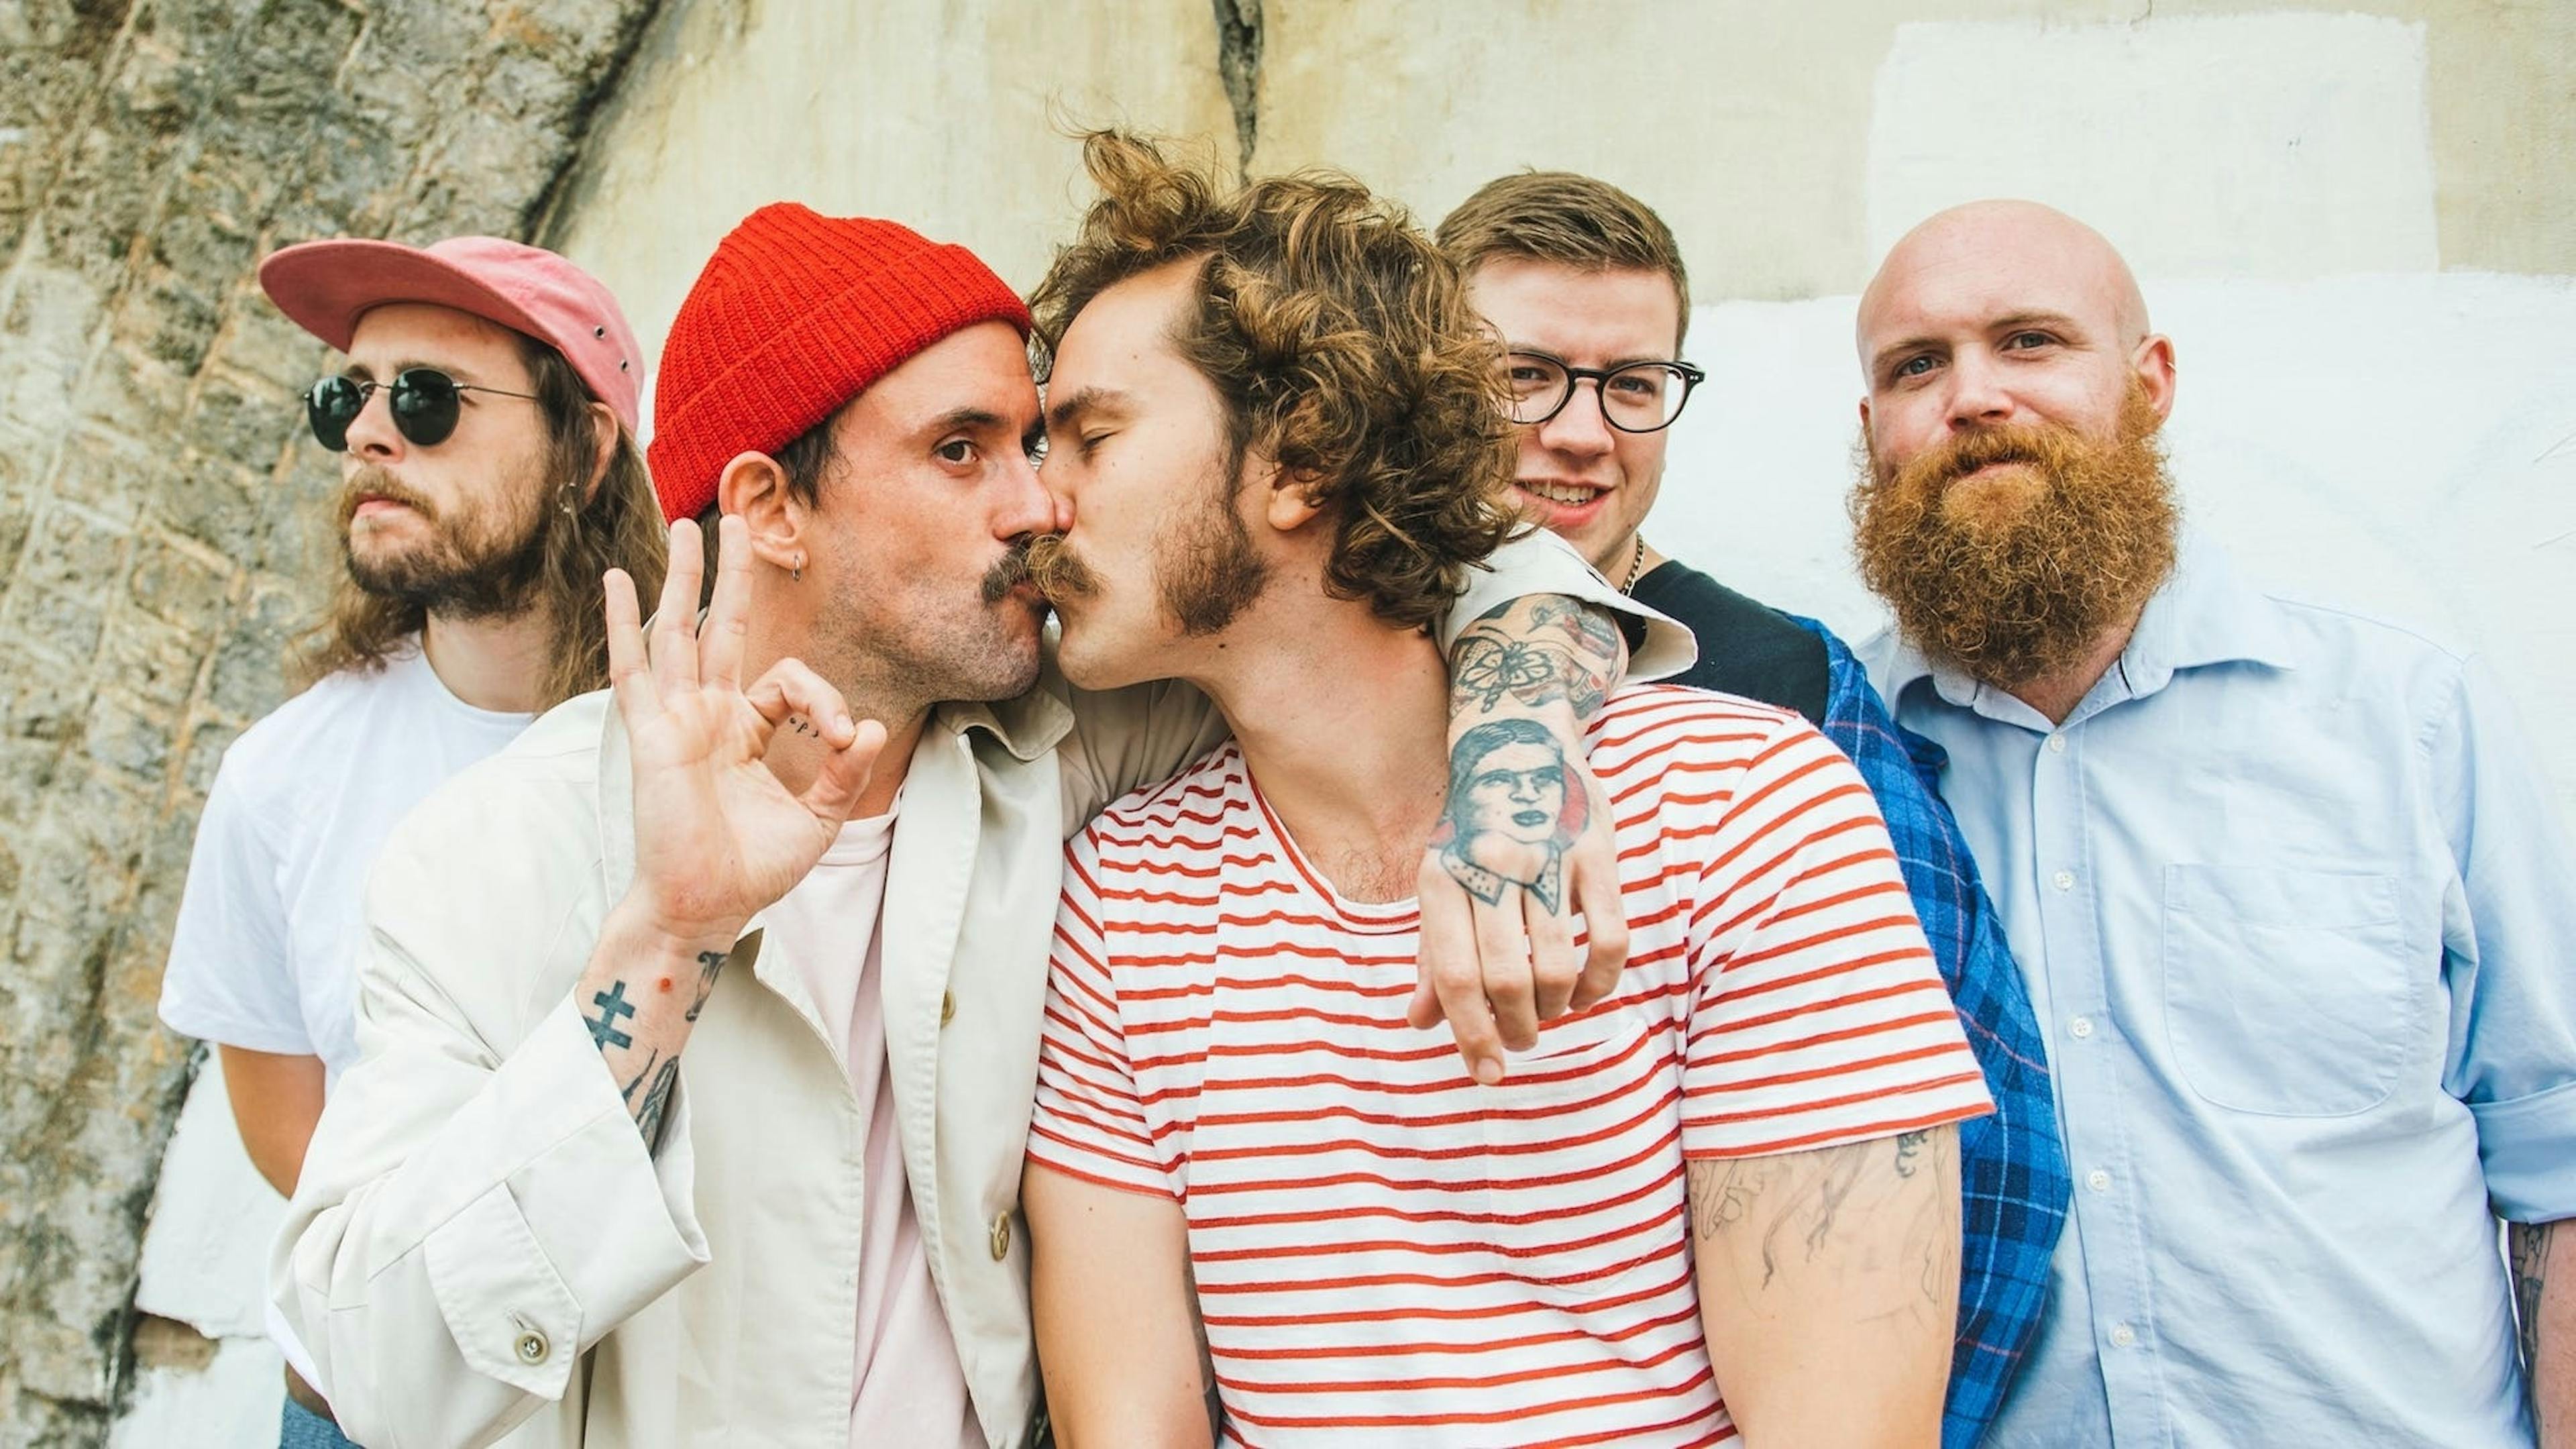 HAPPINESS IS ALL THE RAGE: IDLES’ JOE TALBOT ON TOXIC MASCULINITY AND VULNERABILITY